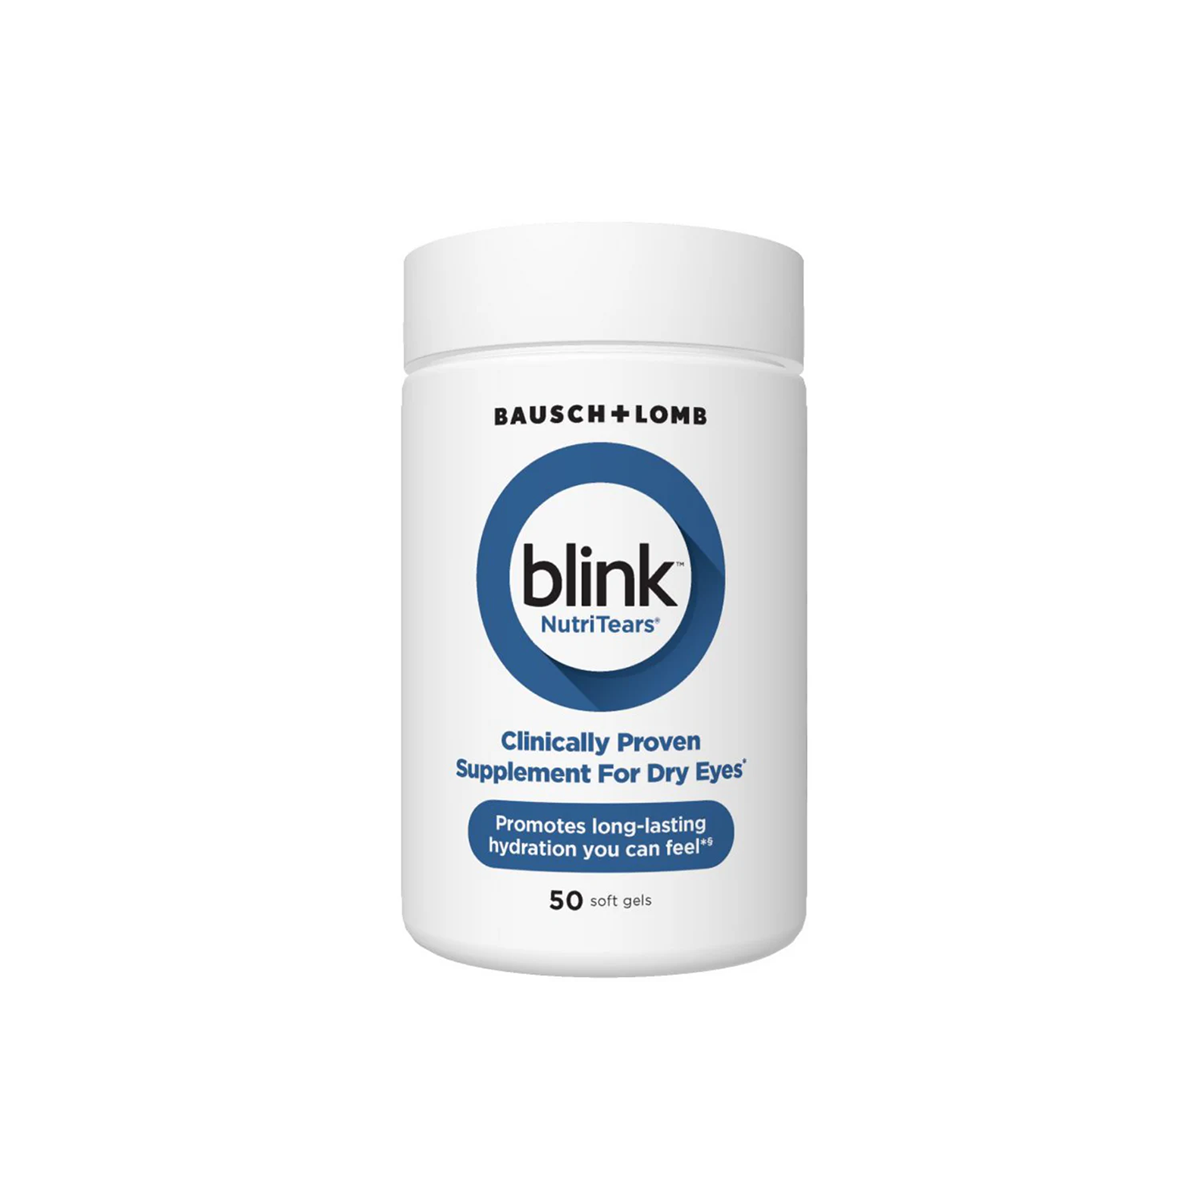 Blink NutriTears supplement for Dry Eyes (50 Softgels - 2 Mo Supply)